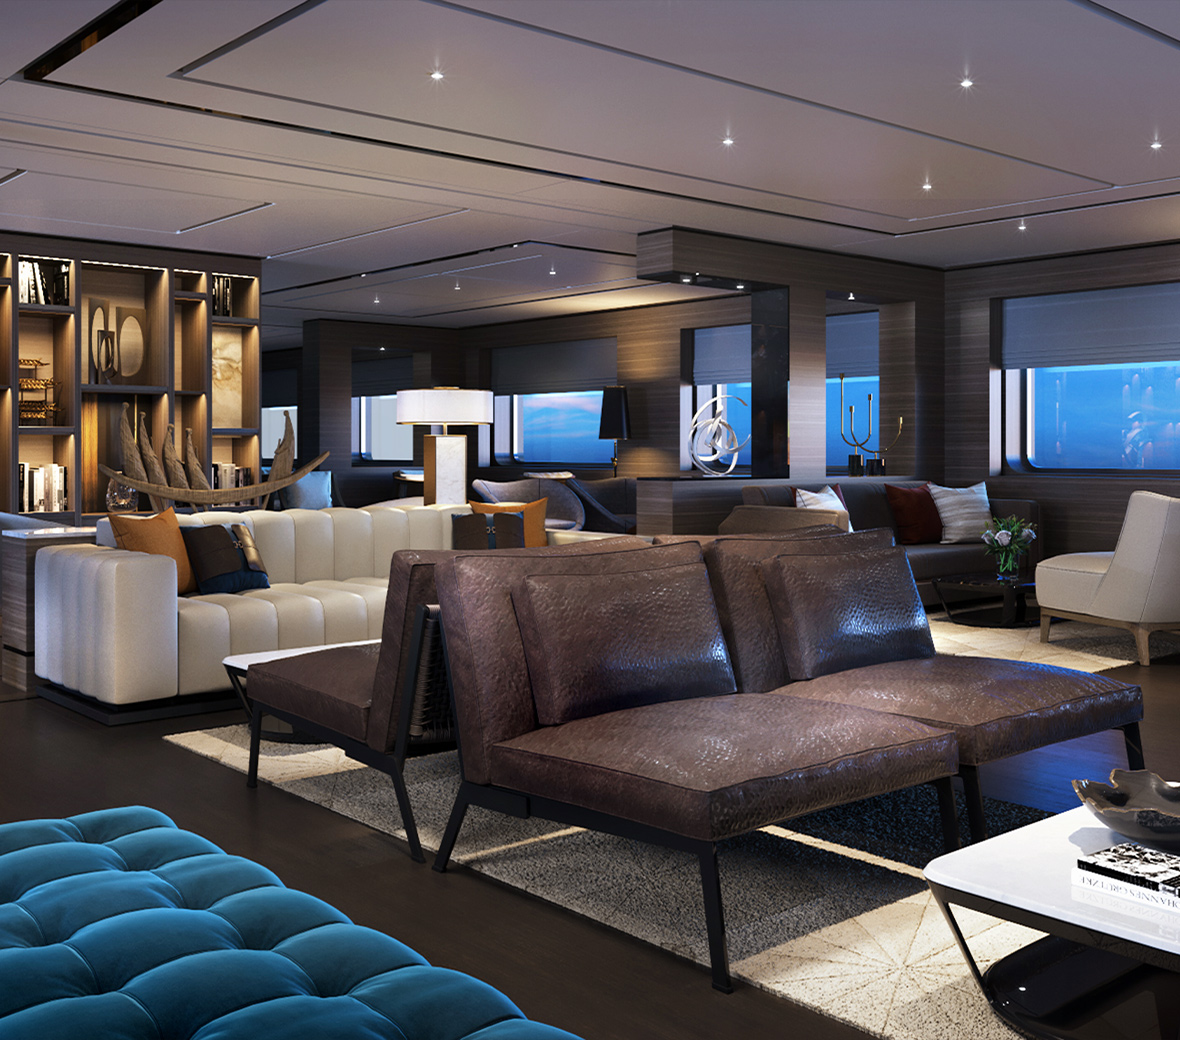 A chic lounge area with dark brown and white sofas and love seats, overlooking the ocean.